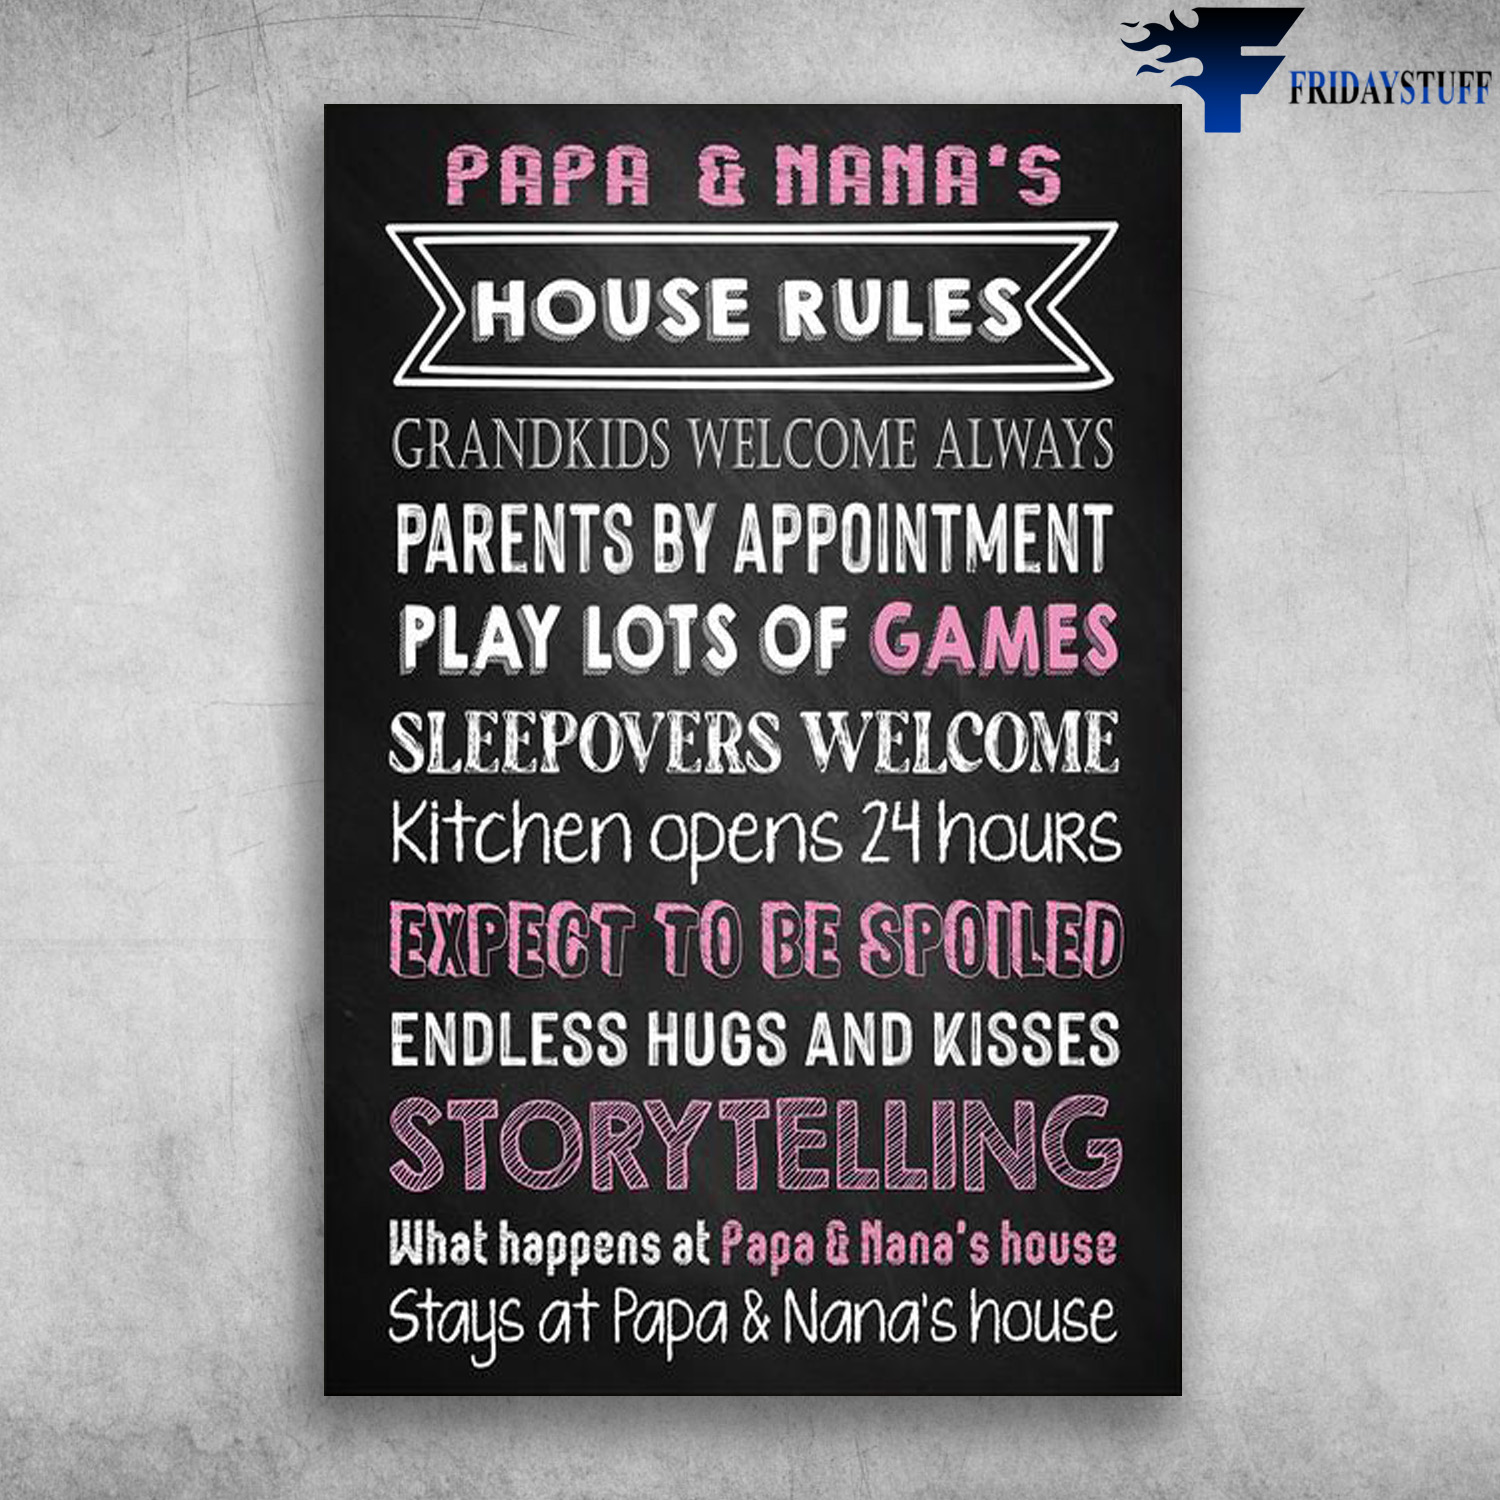 House Rules - Premium Matte, Papa And Nana's House Rules, Grandkids Welcome Always, Parents By Appointment, Play Lots Of Games